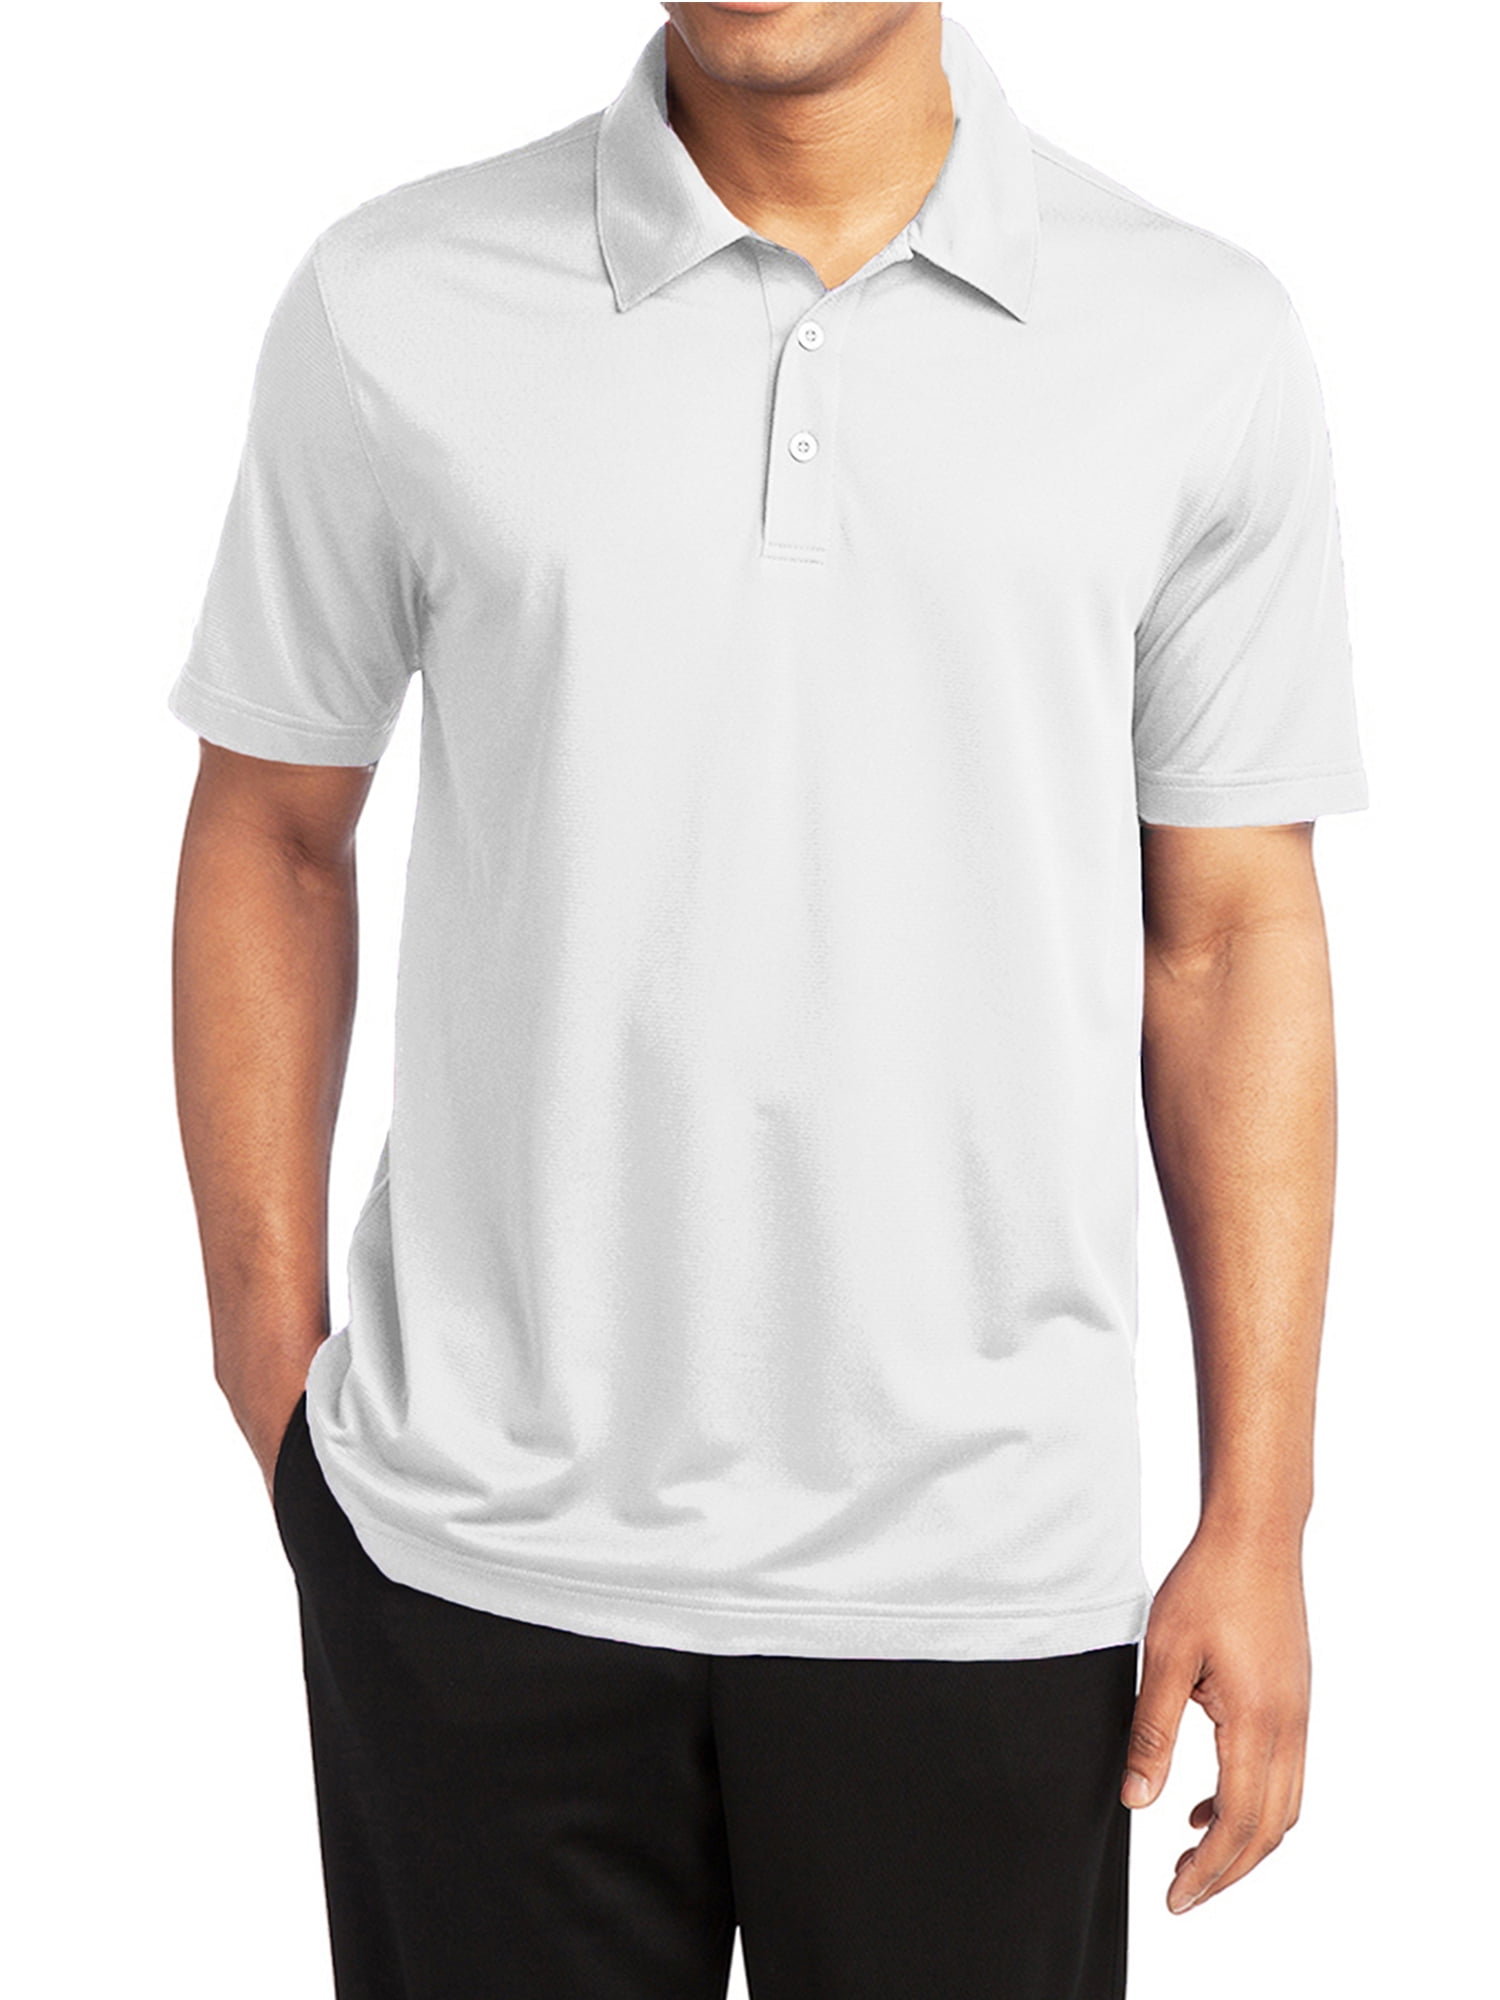 GalaxybyHarvic Men's Basic Cotton Blend Polo Shirt Charcoal / 2XL